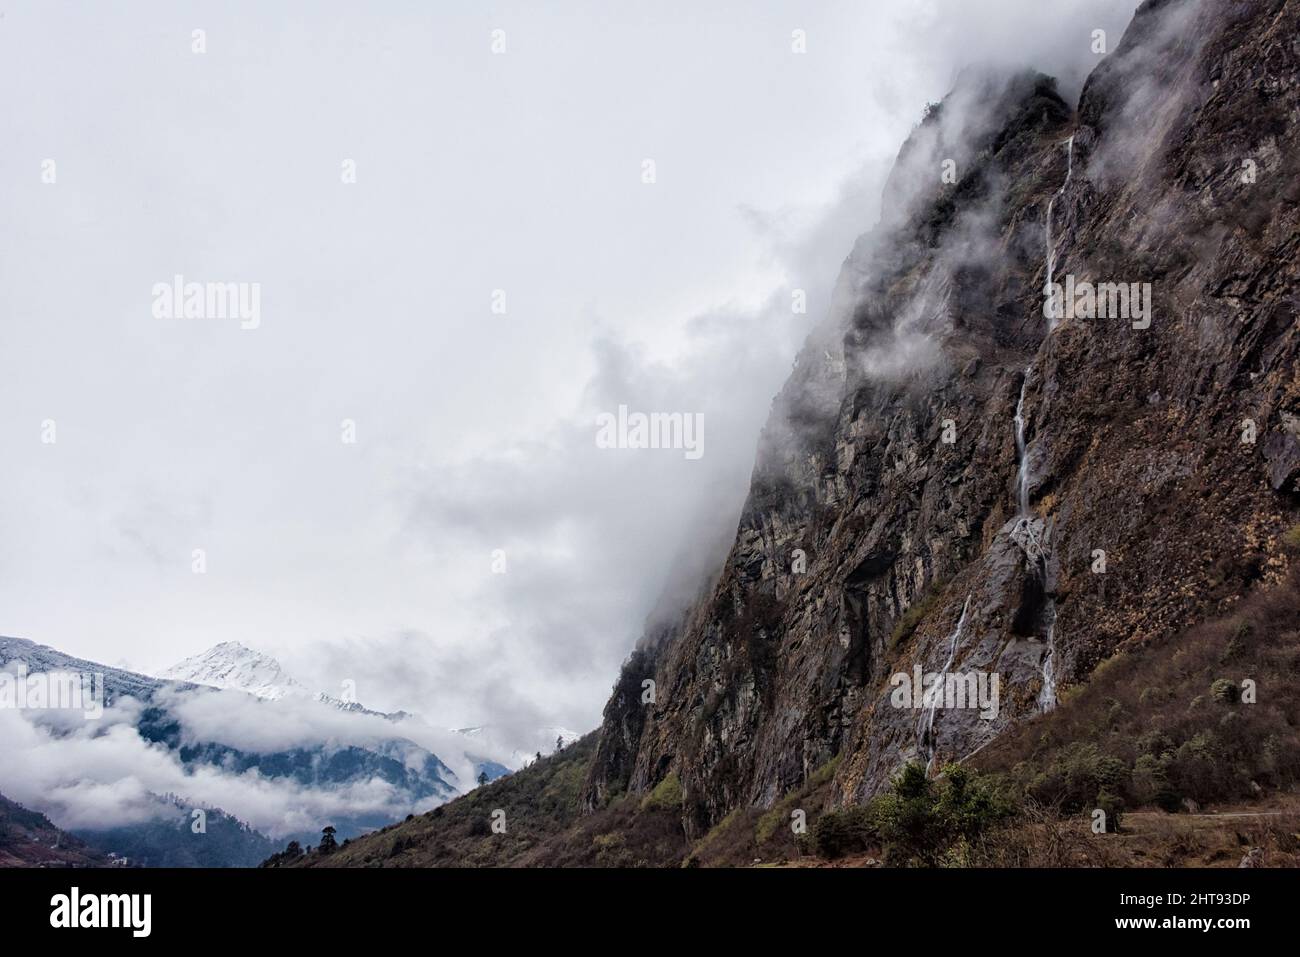 Waterfall on the cliff of mountain side, Lachung, Sikkim, India Stock Photo